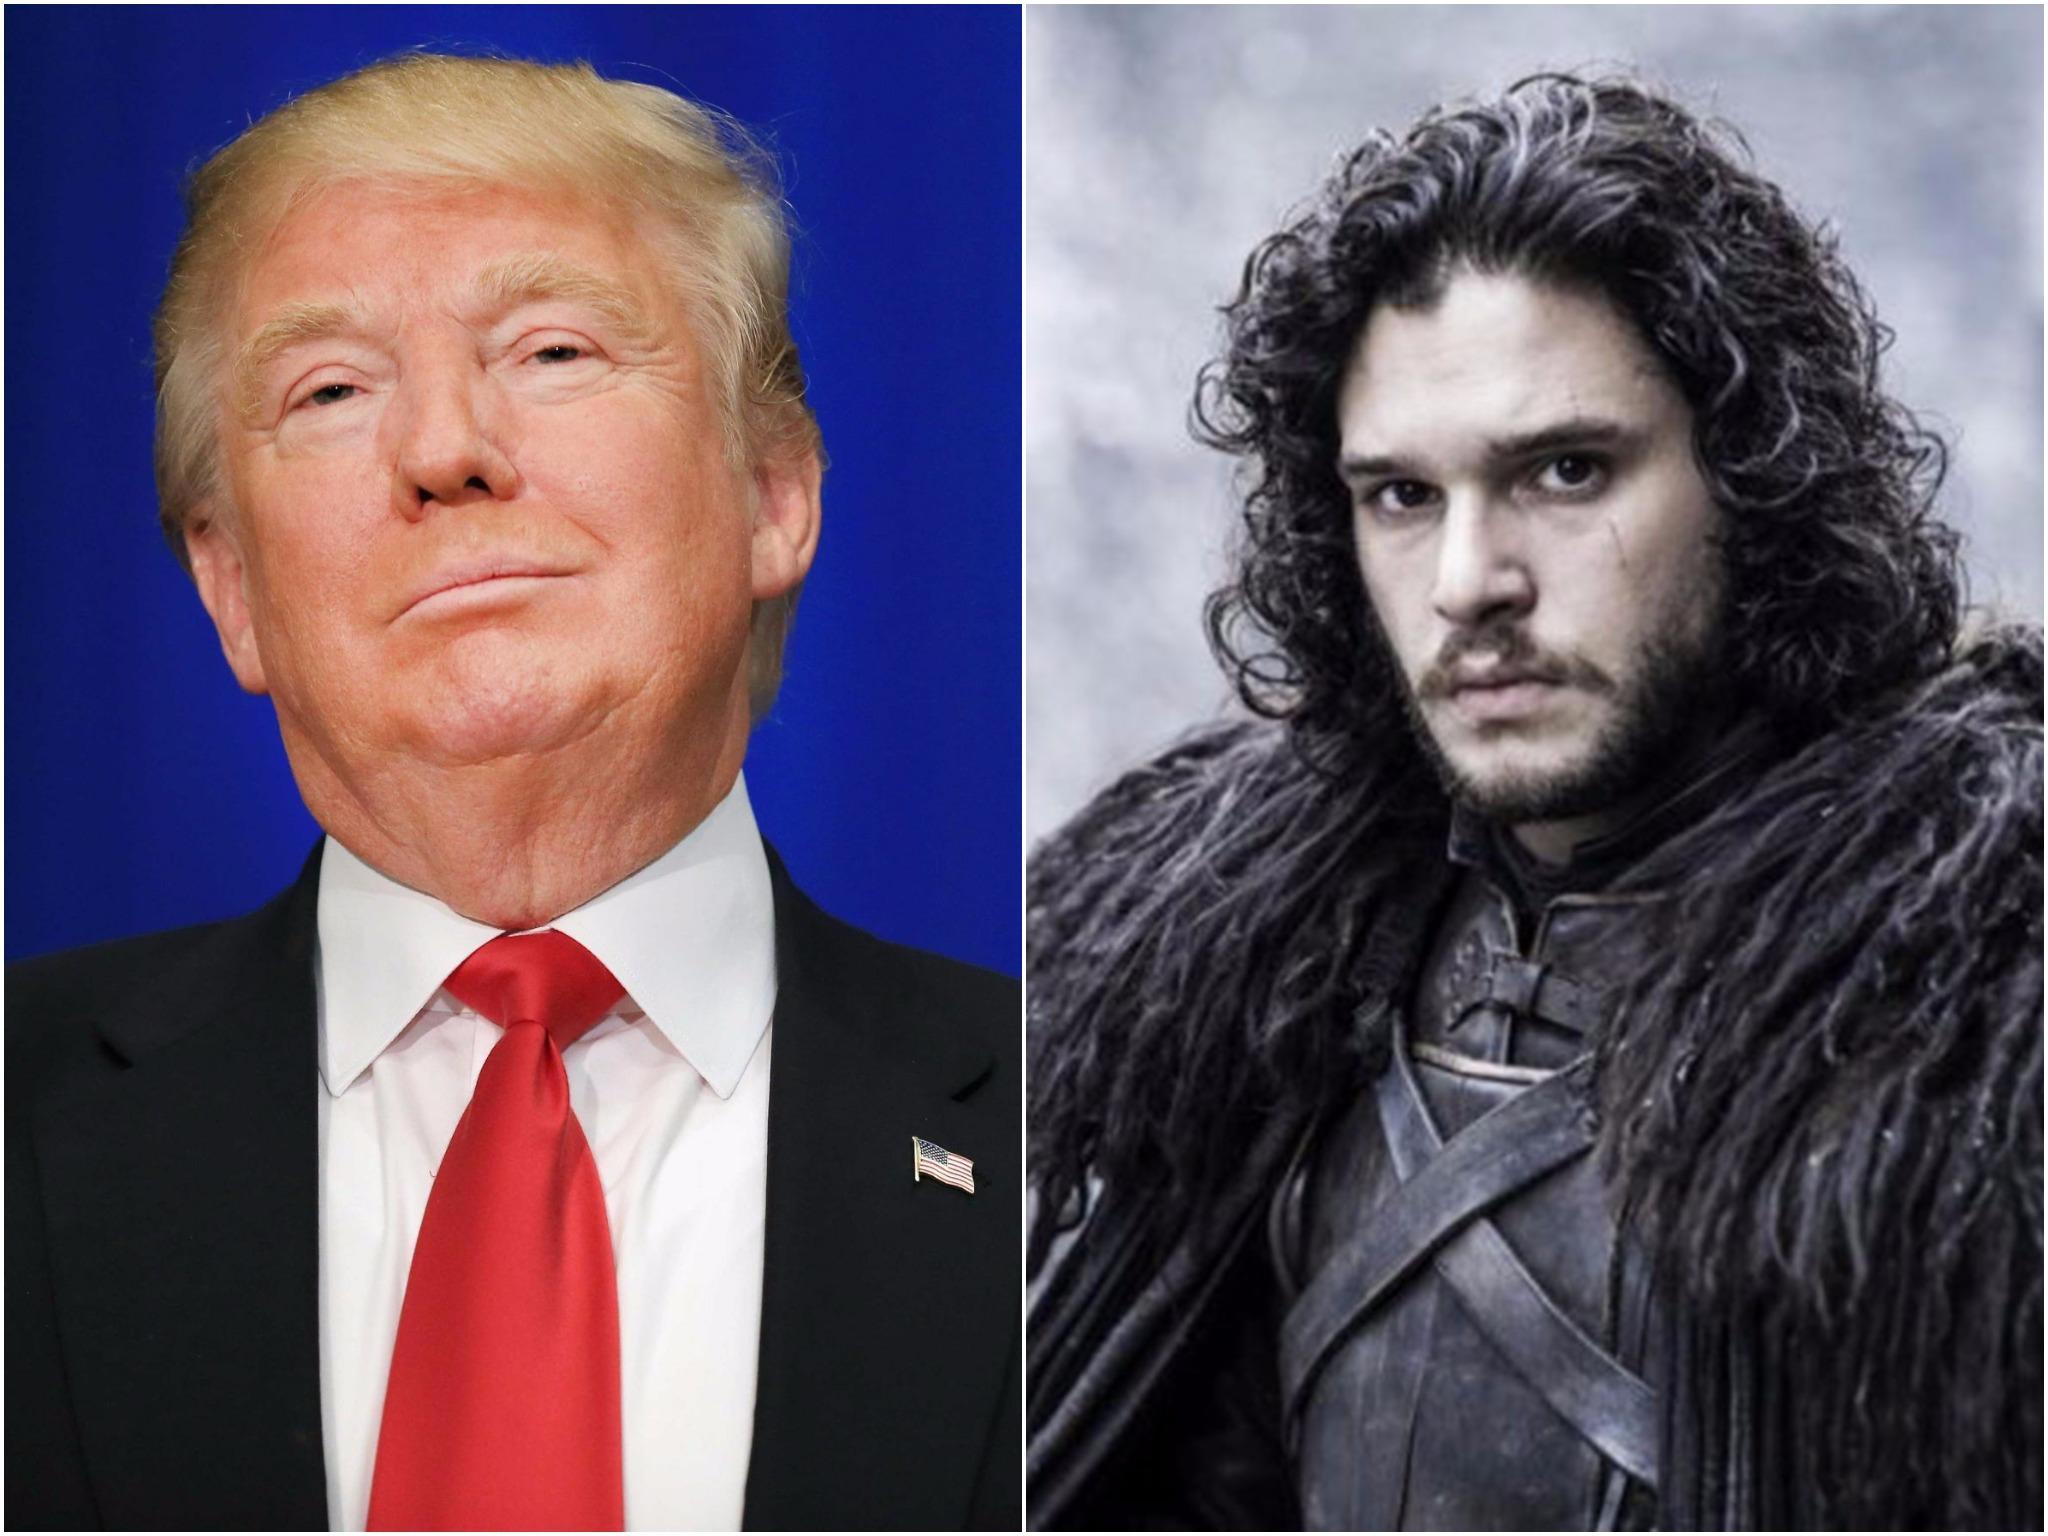 Trevor Noah compares Trump and Game of Thrones character Jon Snow